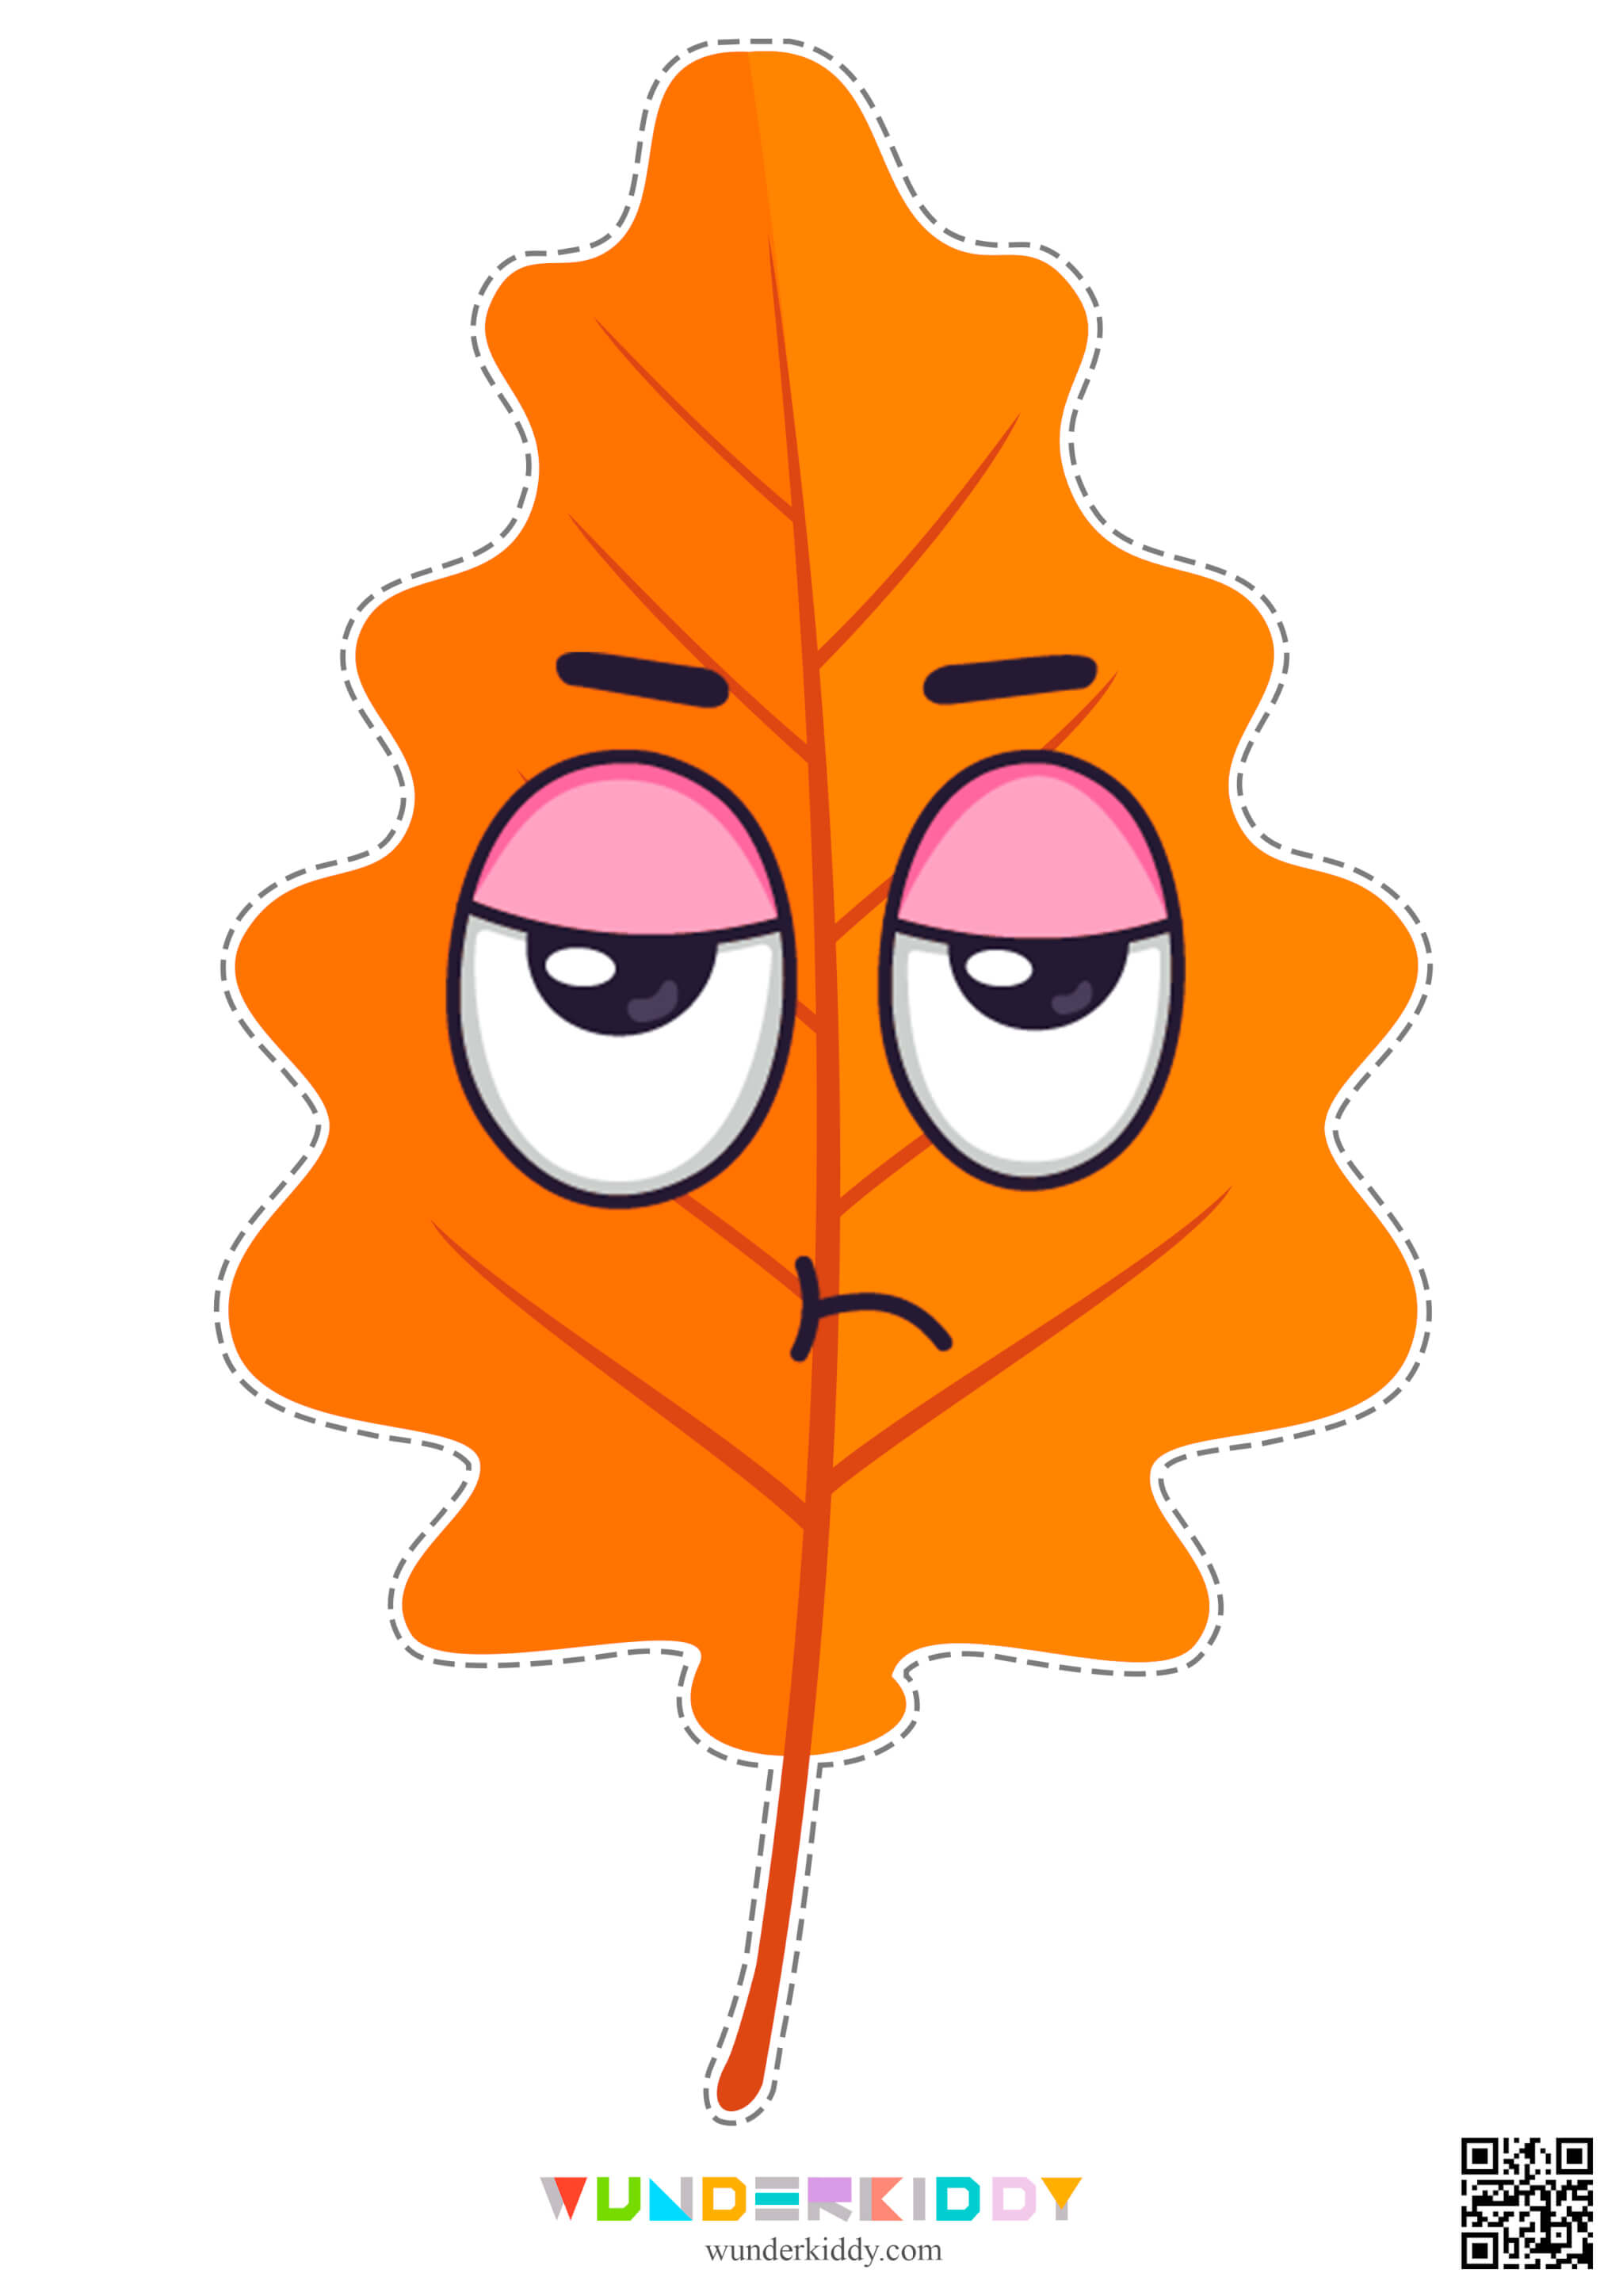 Activity sheet «Funny autumn leaves» - Image 8